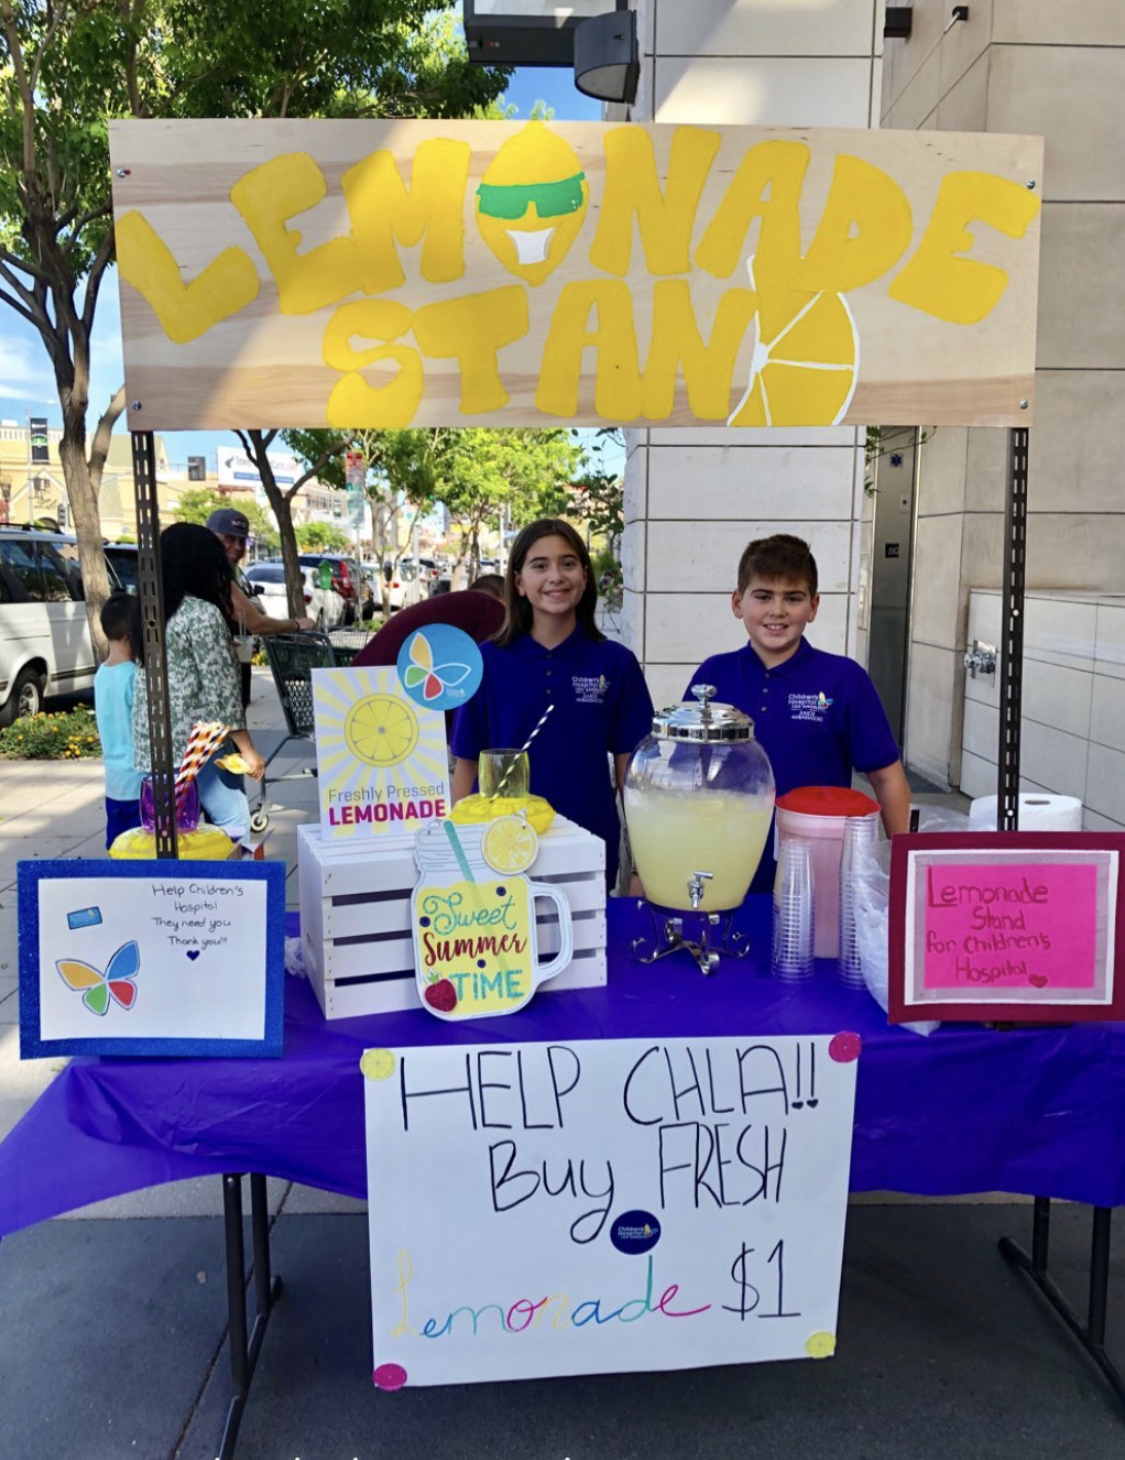 How the Halburian Siblings are Helping CHLA